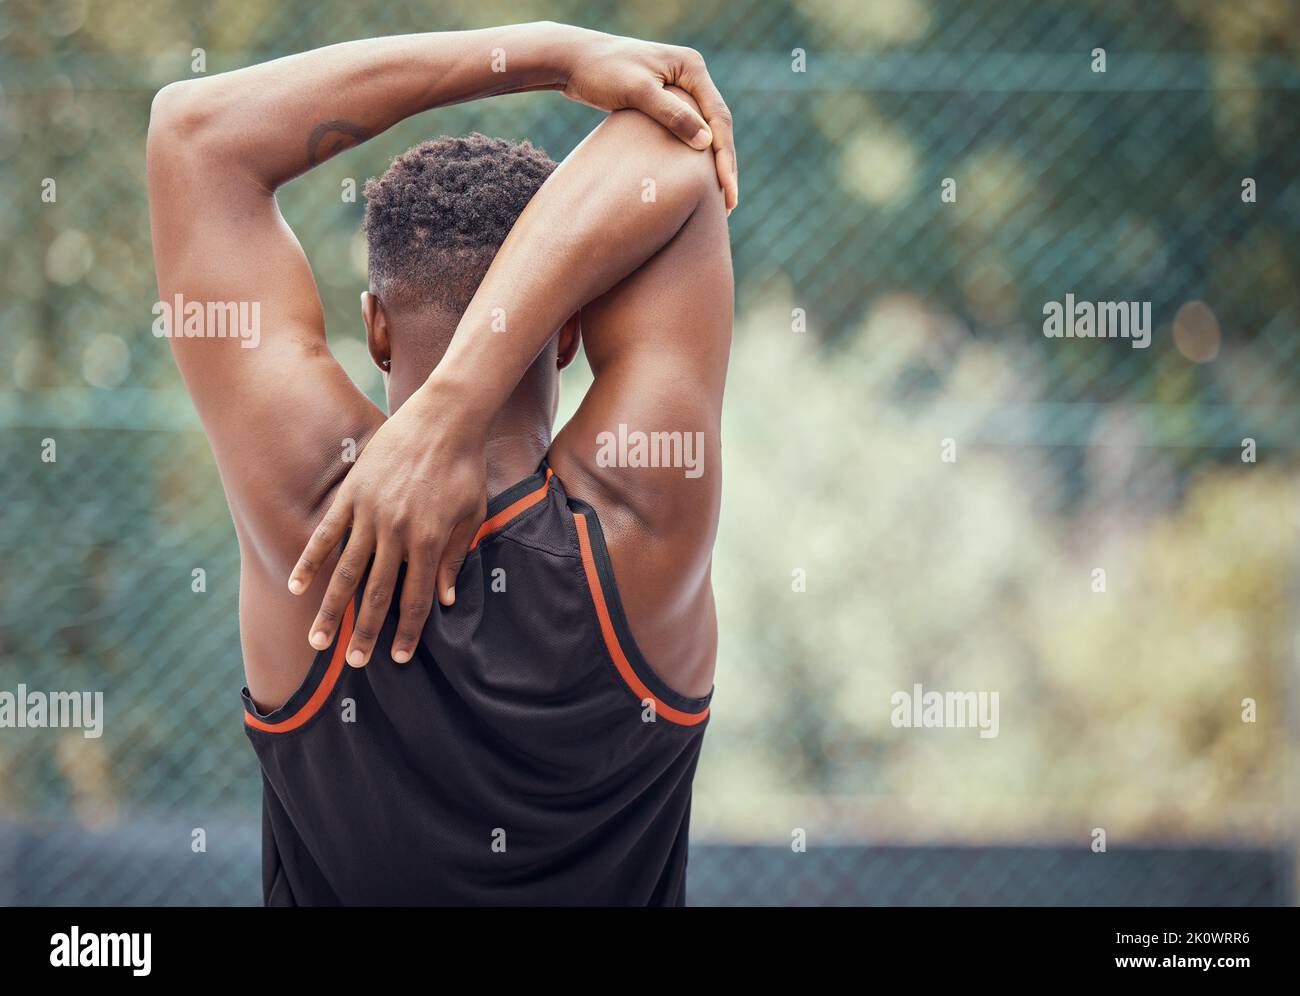 Sports, exercise and training with a man stretching to warmup for sport or fitness outside. Workout, healthy and performance with a male athlete Stock Photo